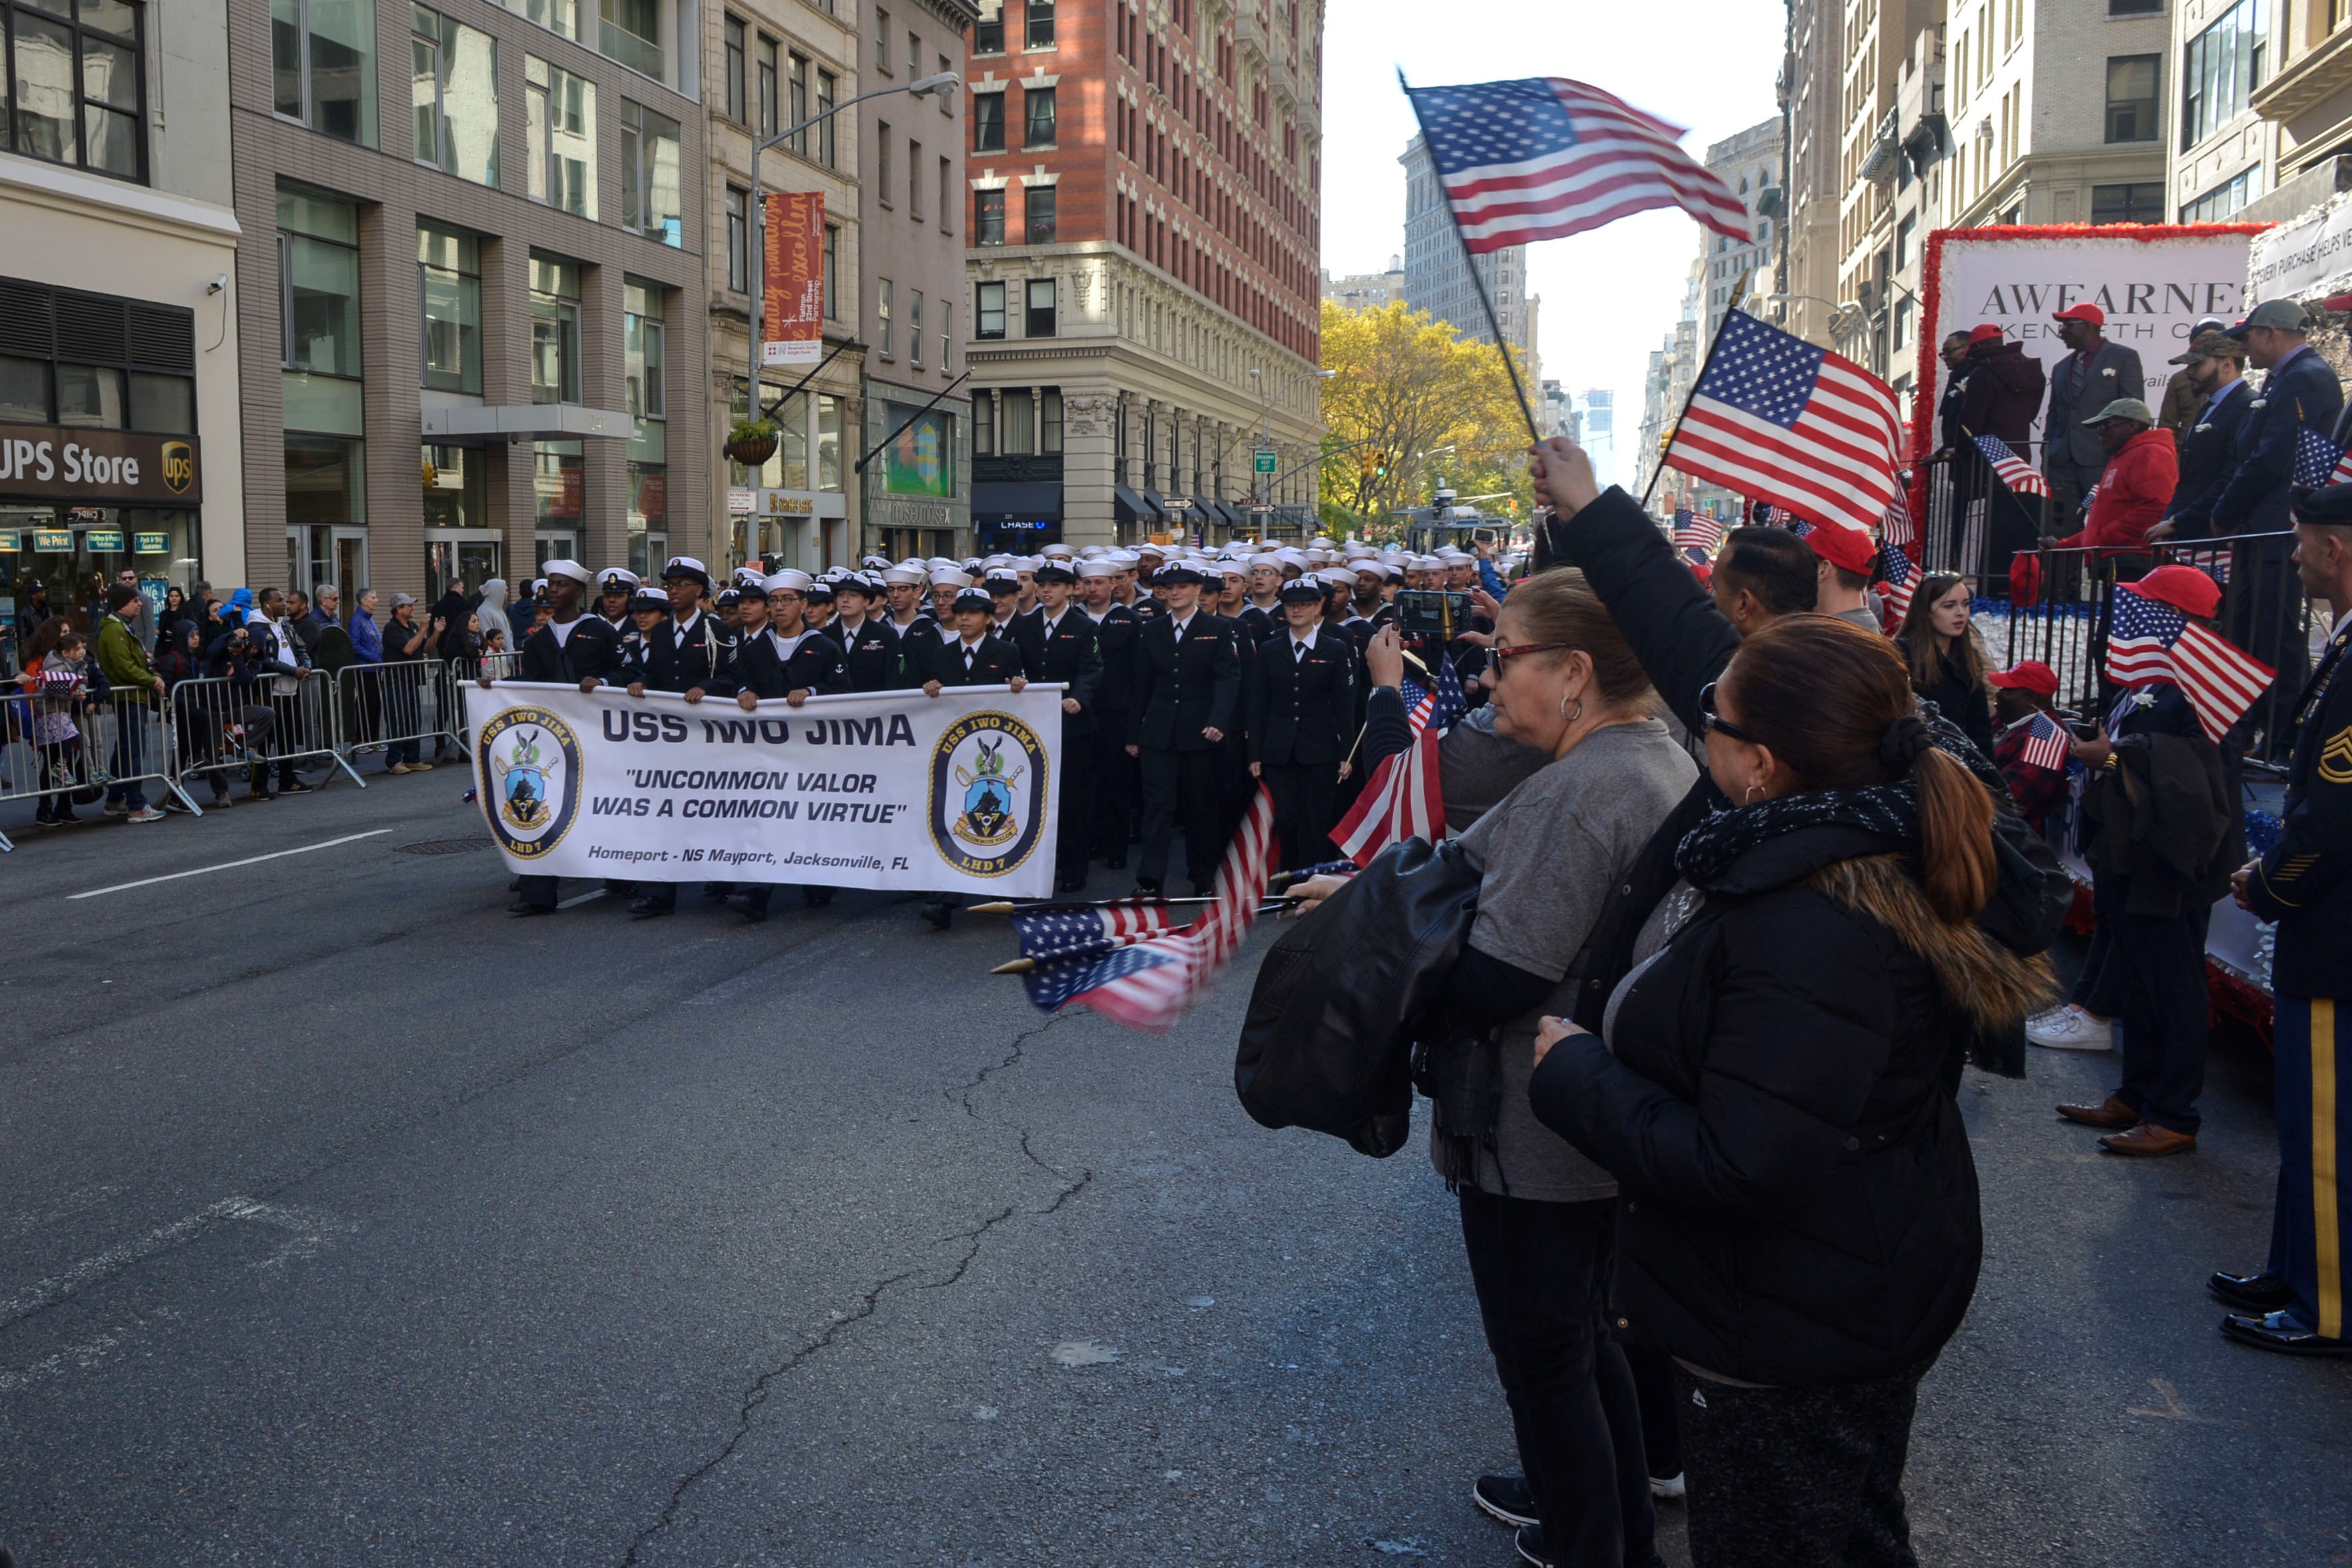 Sailors assigned to the amphibious assault ship USS Iwo Jima march in the 2016 Veterans Day parade in New York City. The ship had recently returned from a humanitarian assistance mission to Haiti in the aftermath of Hurricane Matthew.